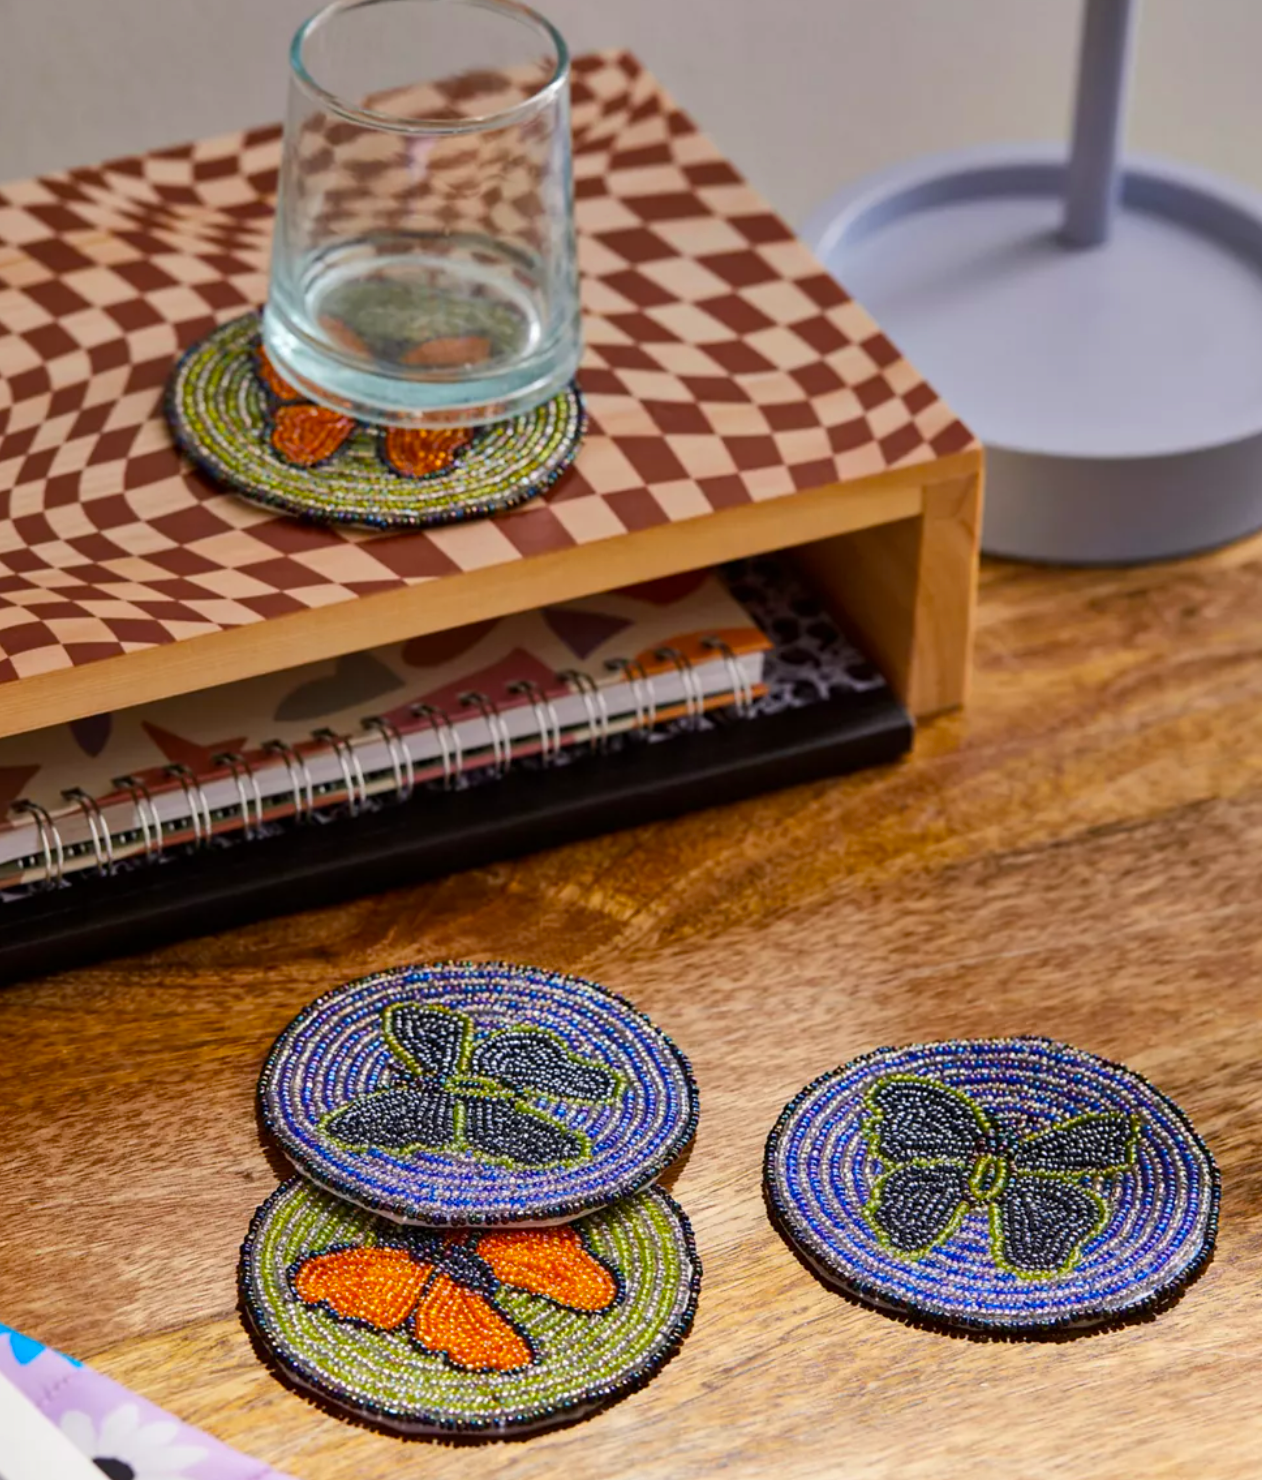 Four beaded coasters on a table, one with a glass on them